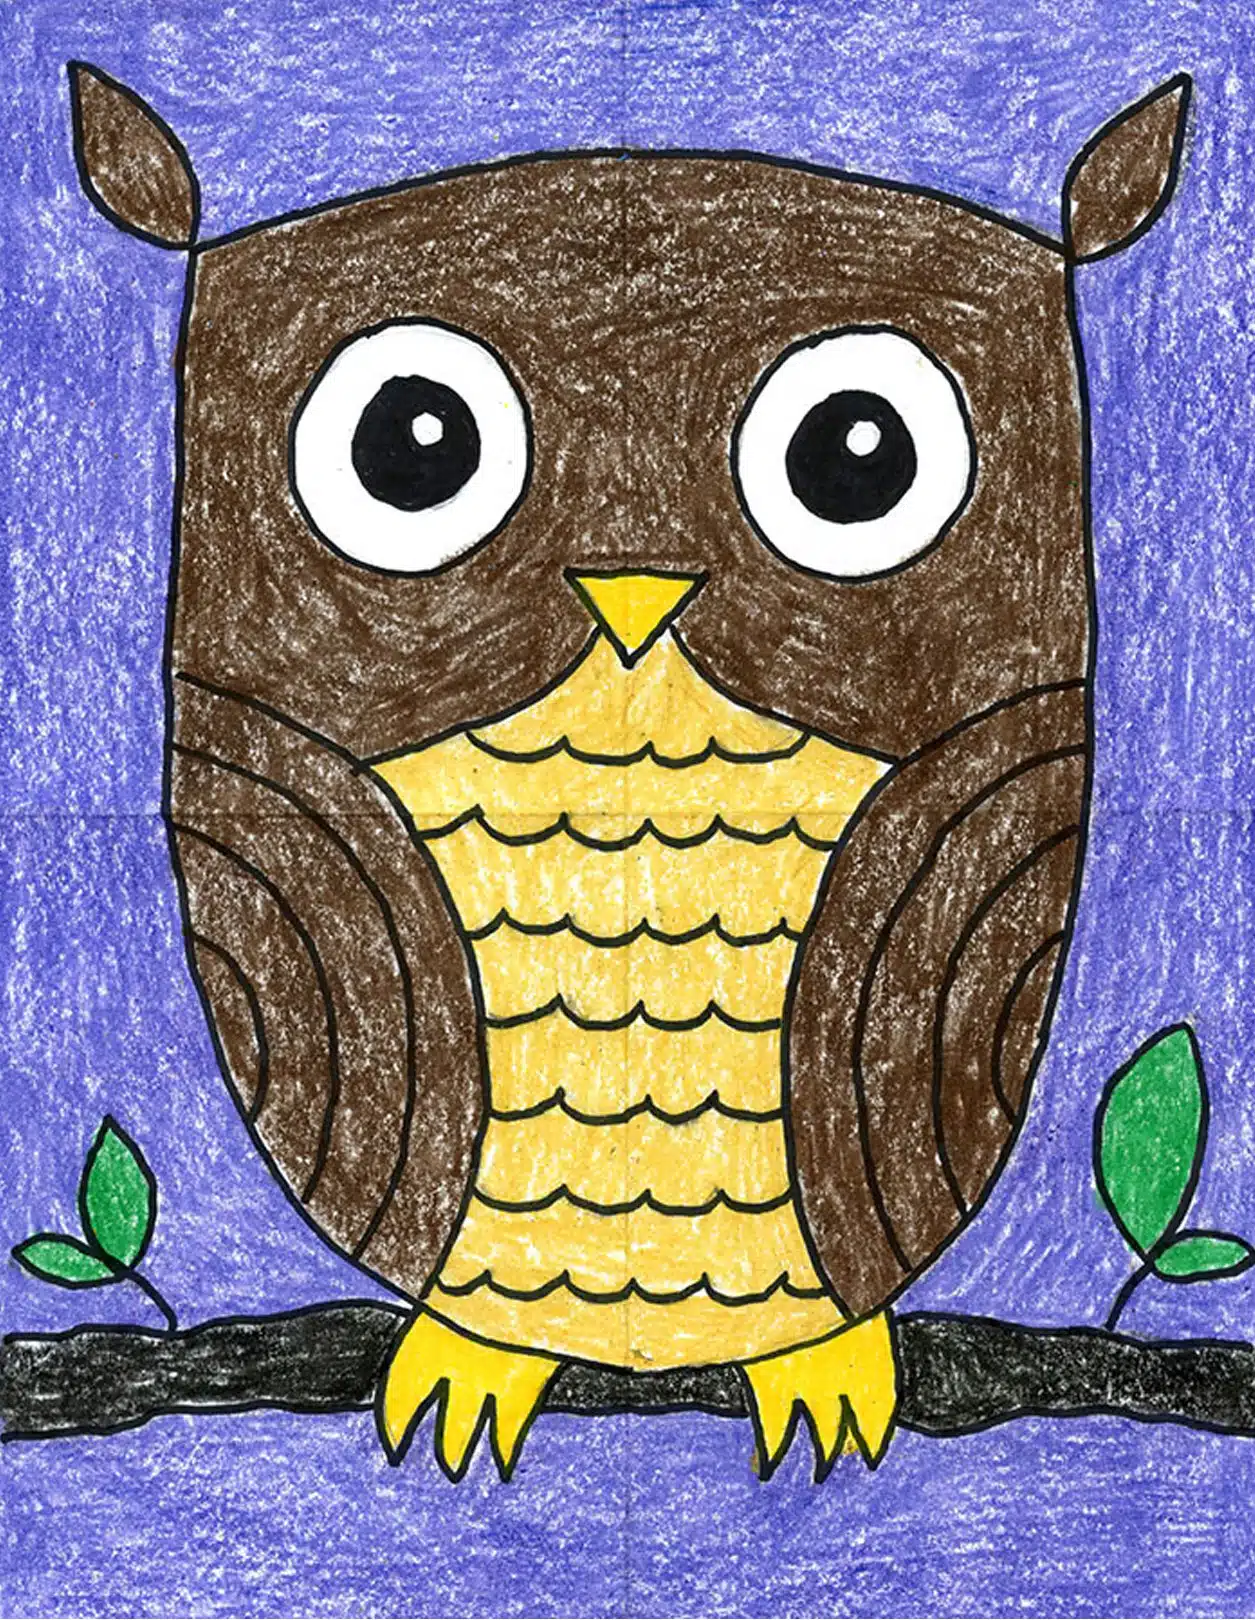 How to Draw an Easy Owl Tutorial Video and Easy Owl Coloring Page